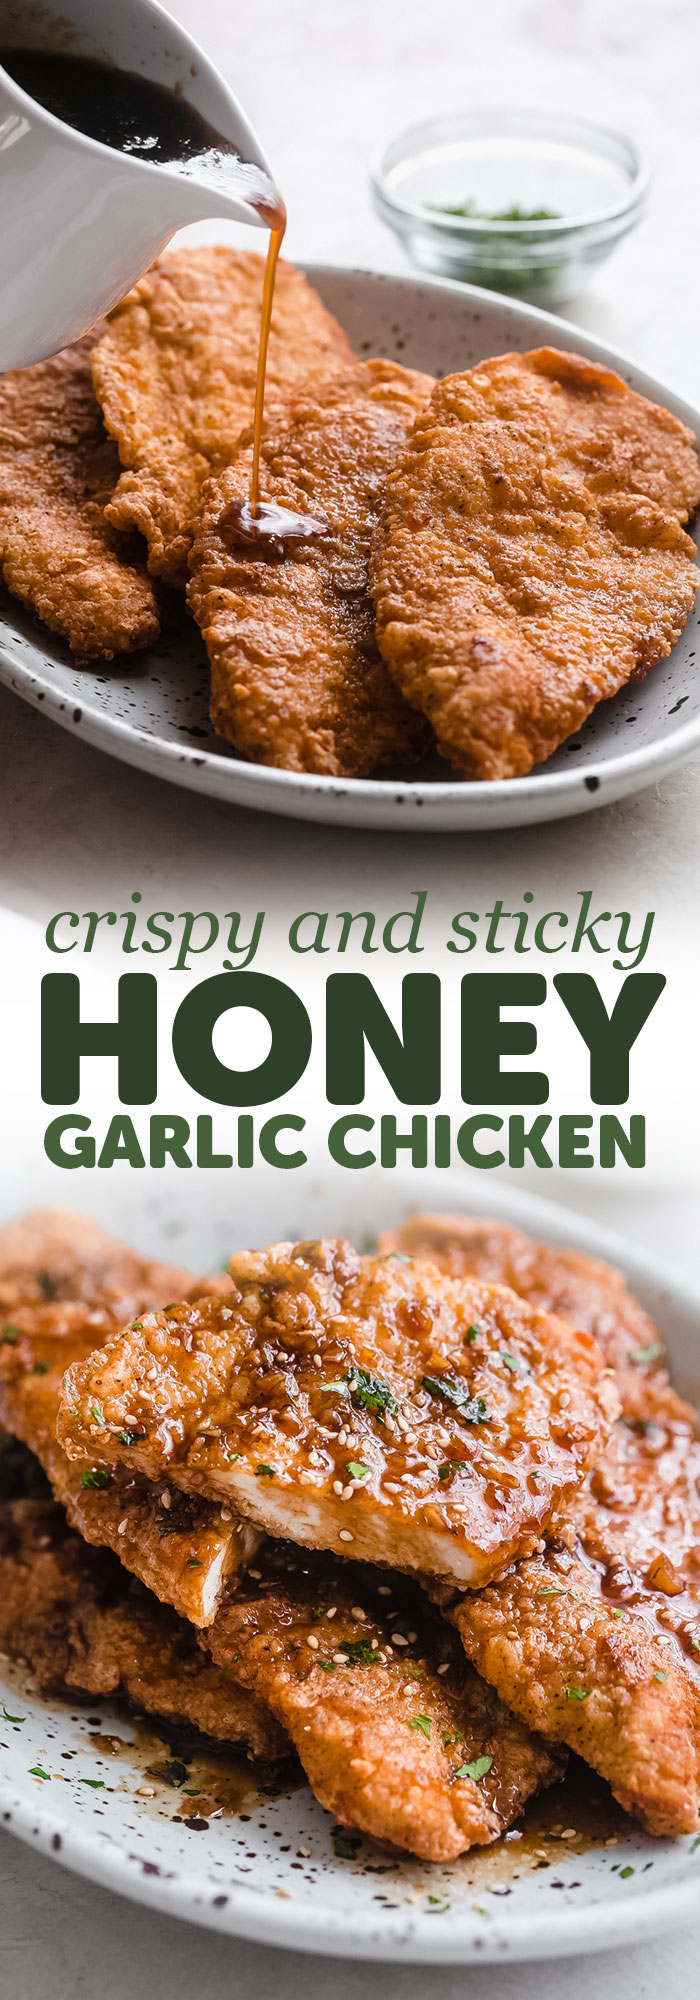 Crispy Sticky Honey Garlic Chicken - Learn how to make hot and crispy fried chicken with honey garlic sauce! Serve this with steamed veggies on the side to keep things light or with steamed rice or garlic bread! SO GOOD! #crispychicken #friedchicken #friedchickencutlets #honeygarlicchicken #crispyhoneygarlicchicken | Littlespicejar.com